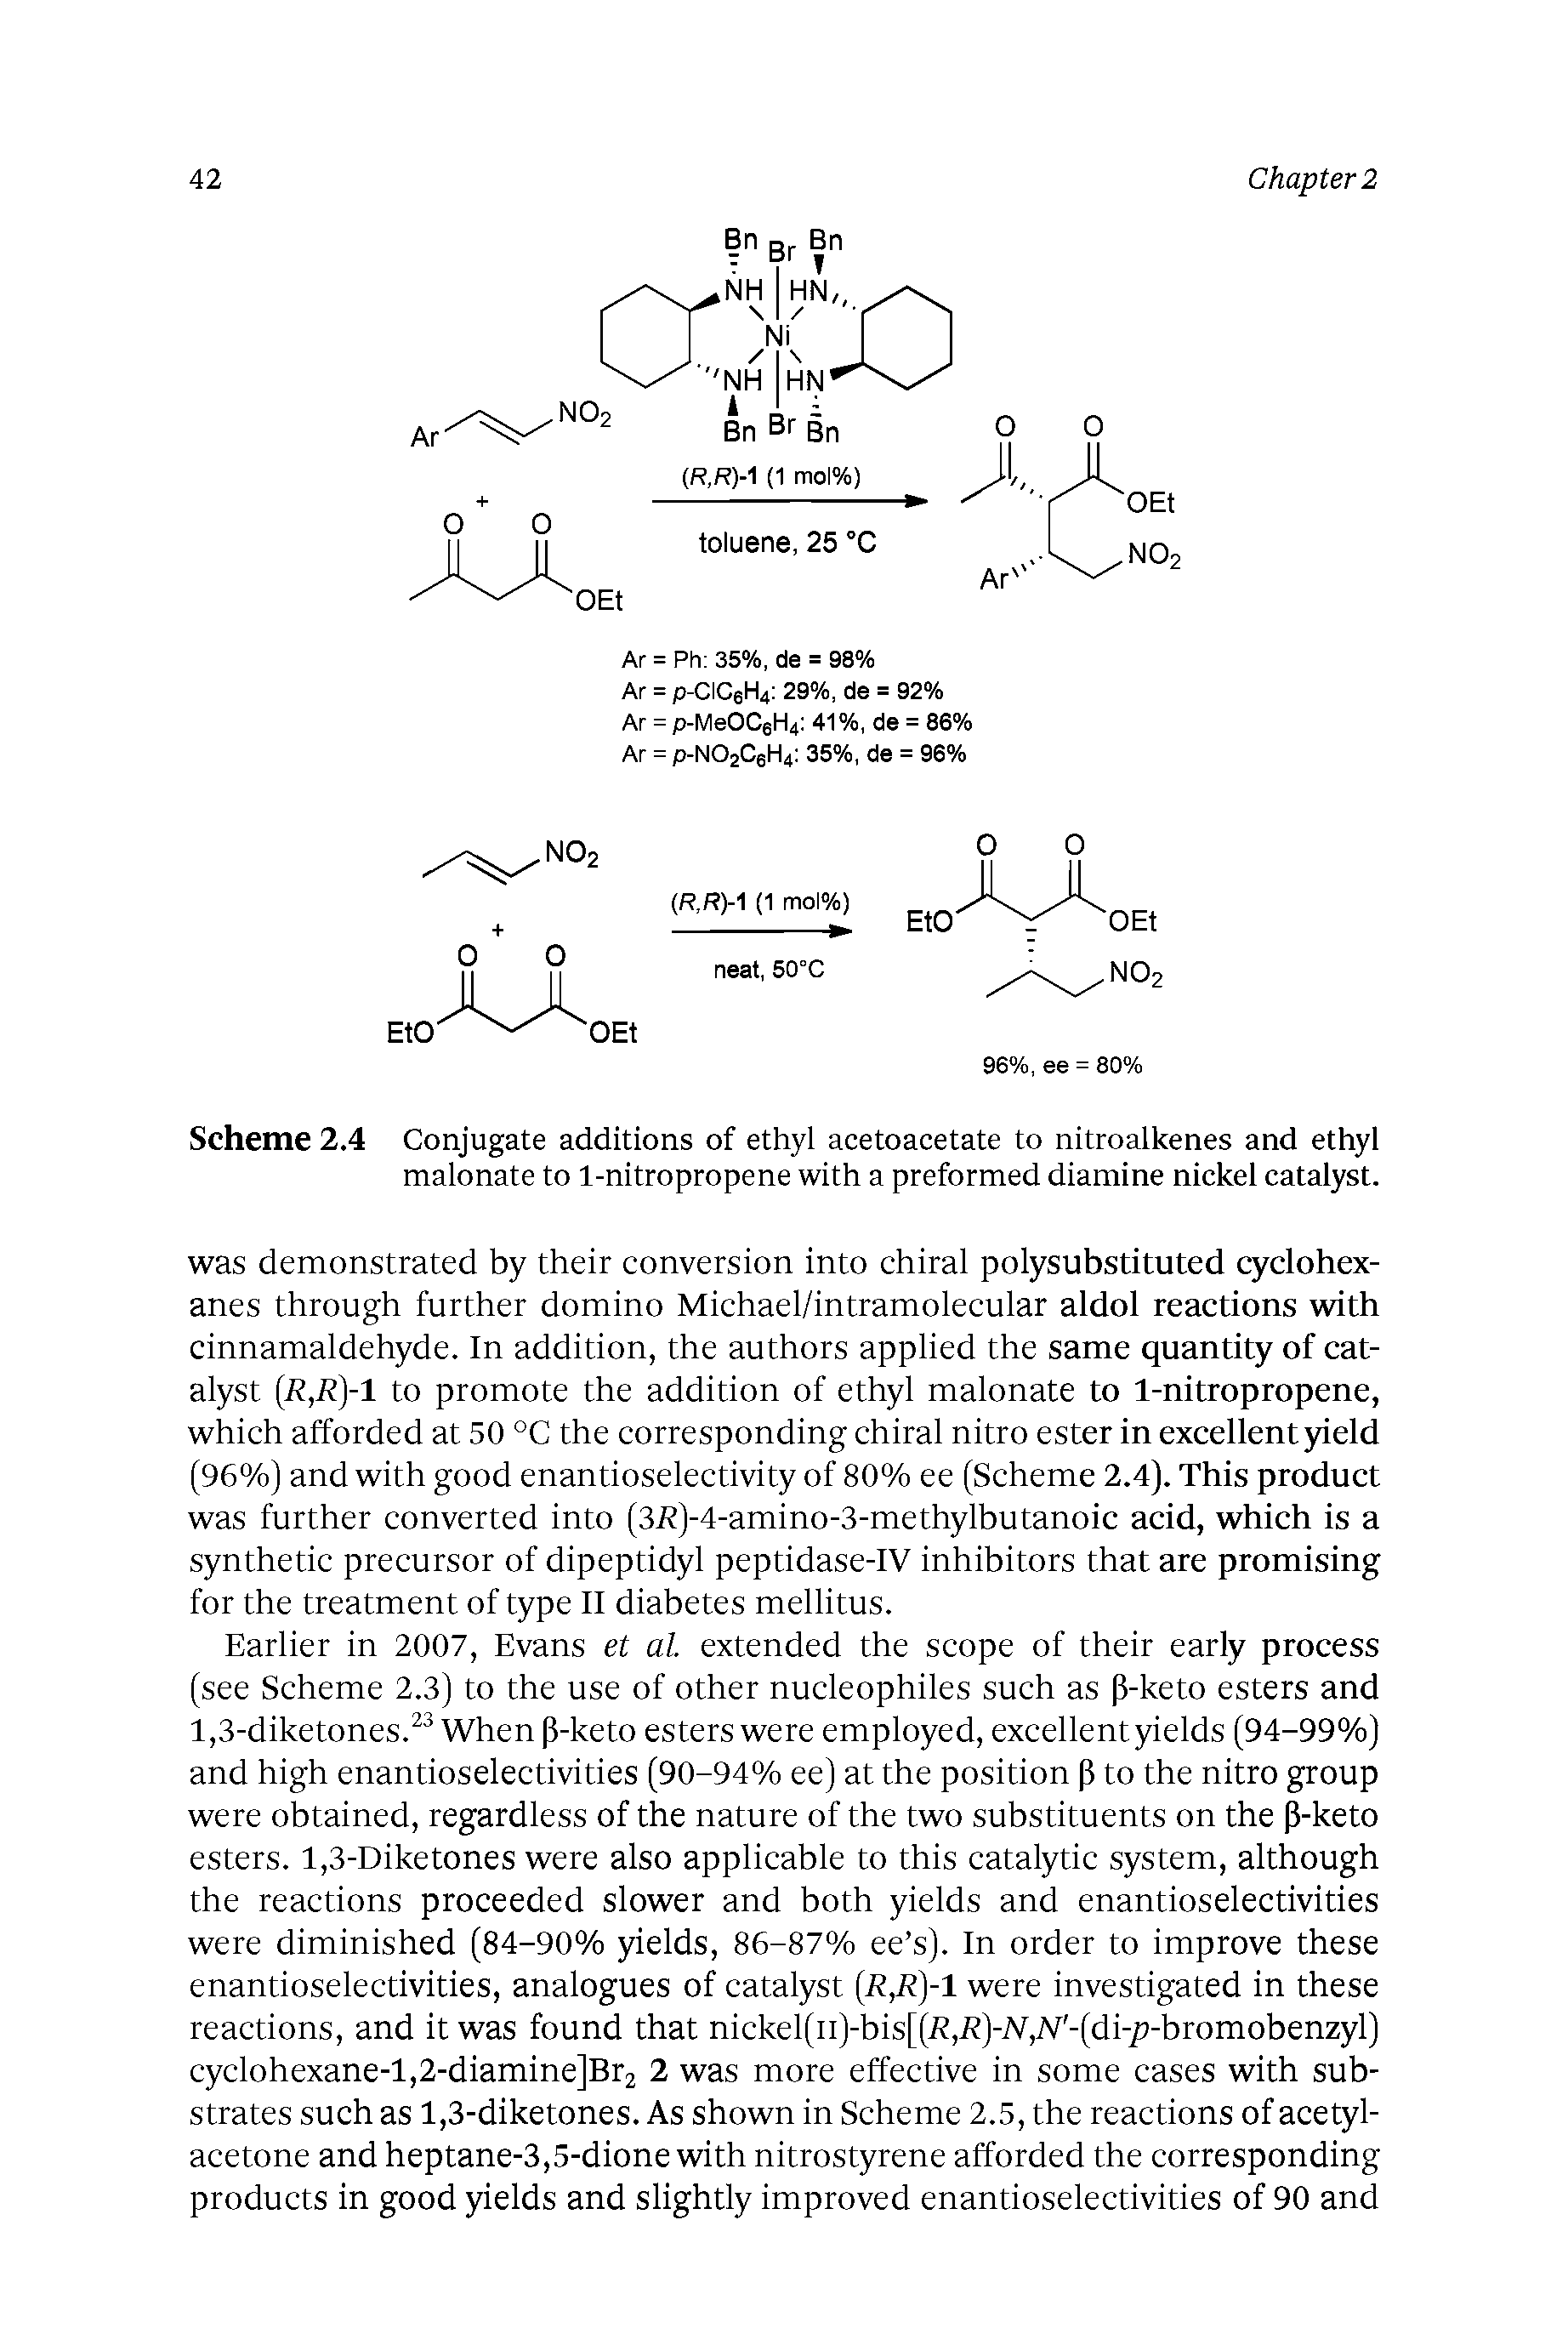 Scheme 2.4 Conjugate additions of ethyl acetoacetate to nitroalkenes and ethyl malonate to 1-nitropropene with a preformed diamine nickel catalyst.